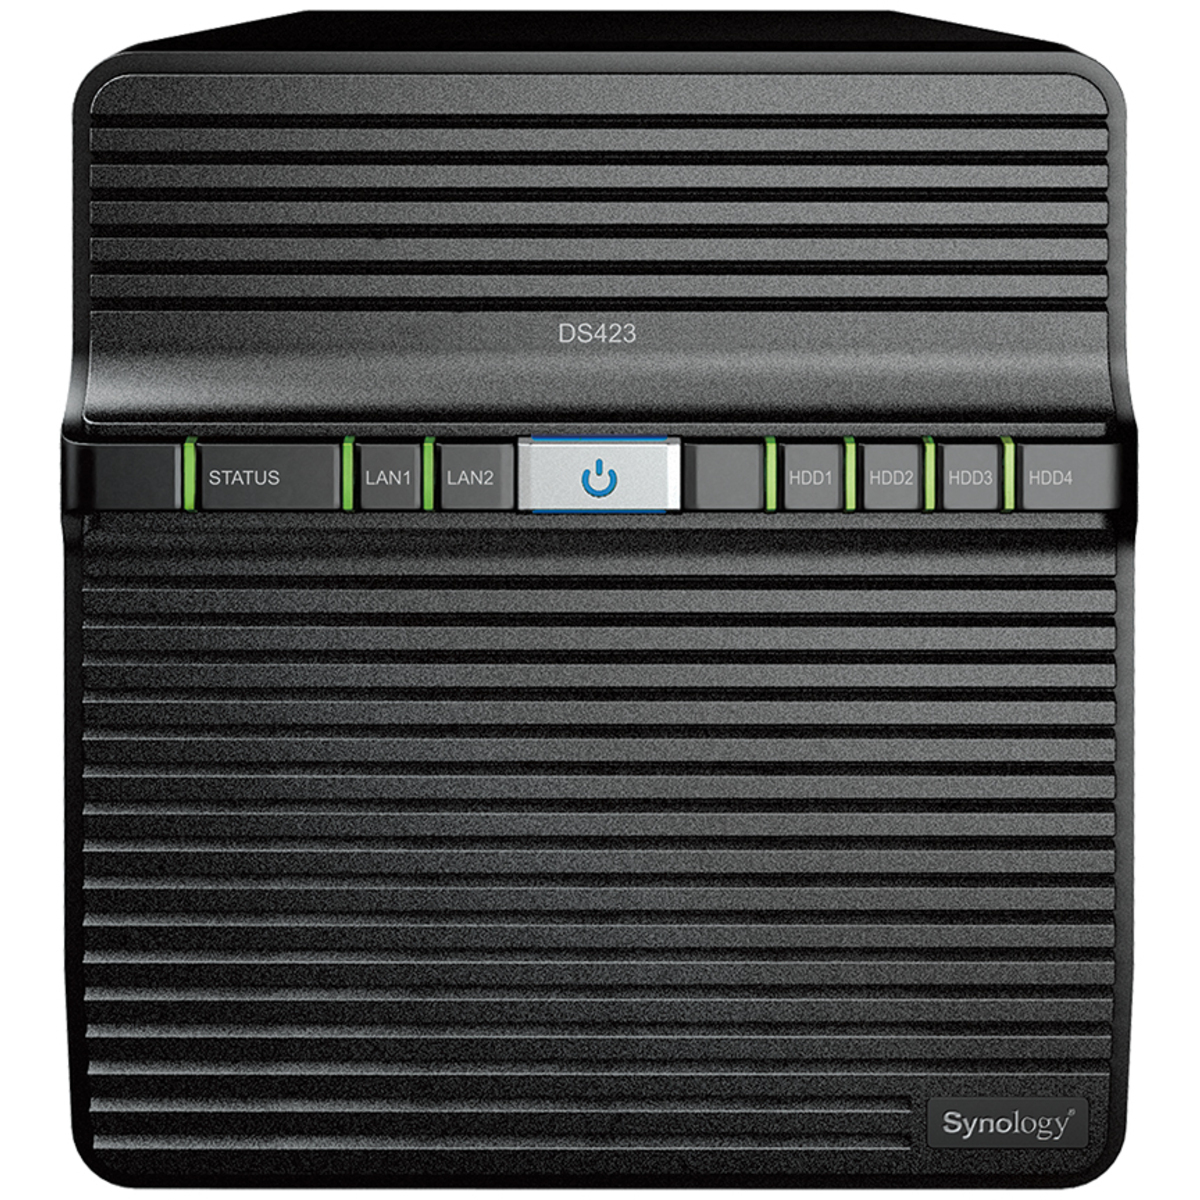 Synology DiskStation DS423 72tb 4-Bay Desktop Personal / Basic Home / Small Office NAS - Network Attached Storage Device 4x18tb Seagate IronWolf Pro ST18000NT001 3.5 7200rpm SATA 6Gb/s HDD NAS Class Drives Installed - Burn-In Tested DiskStation DS423